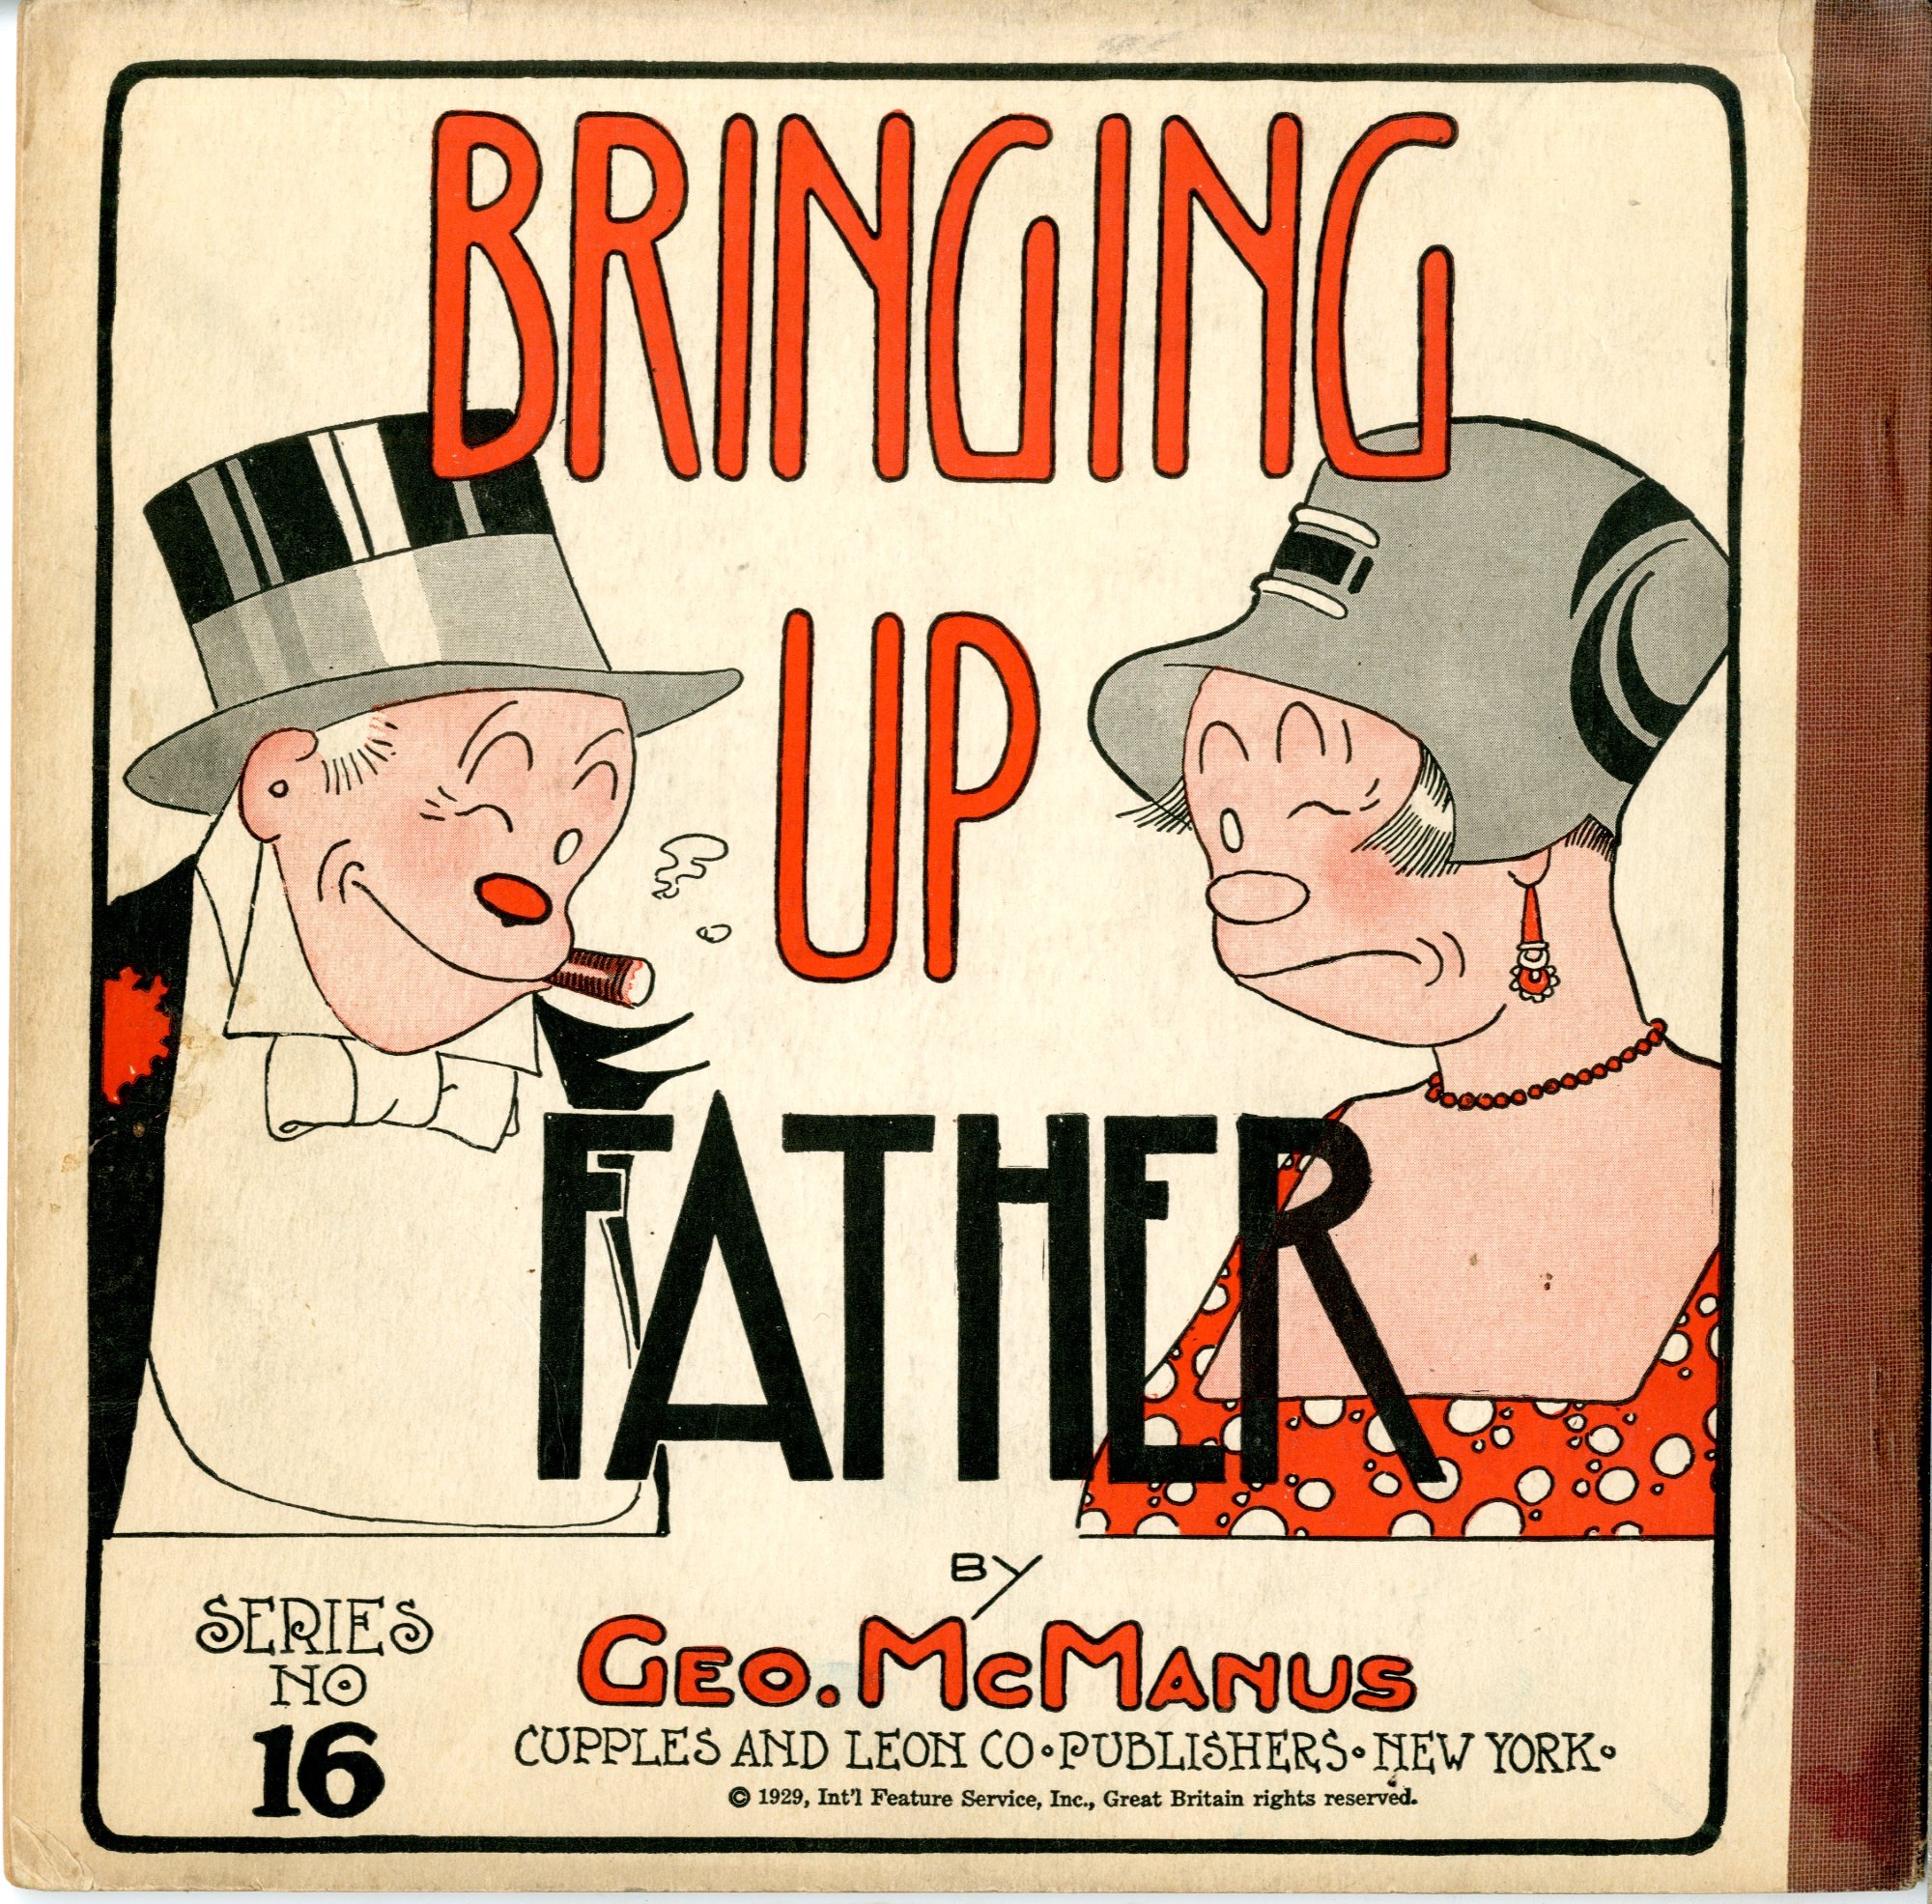 Bringing Up Father      Series #16 - 17165